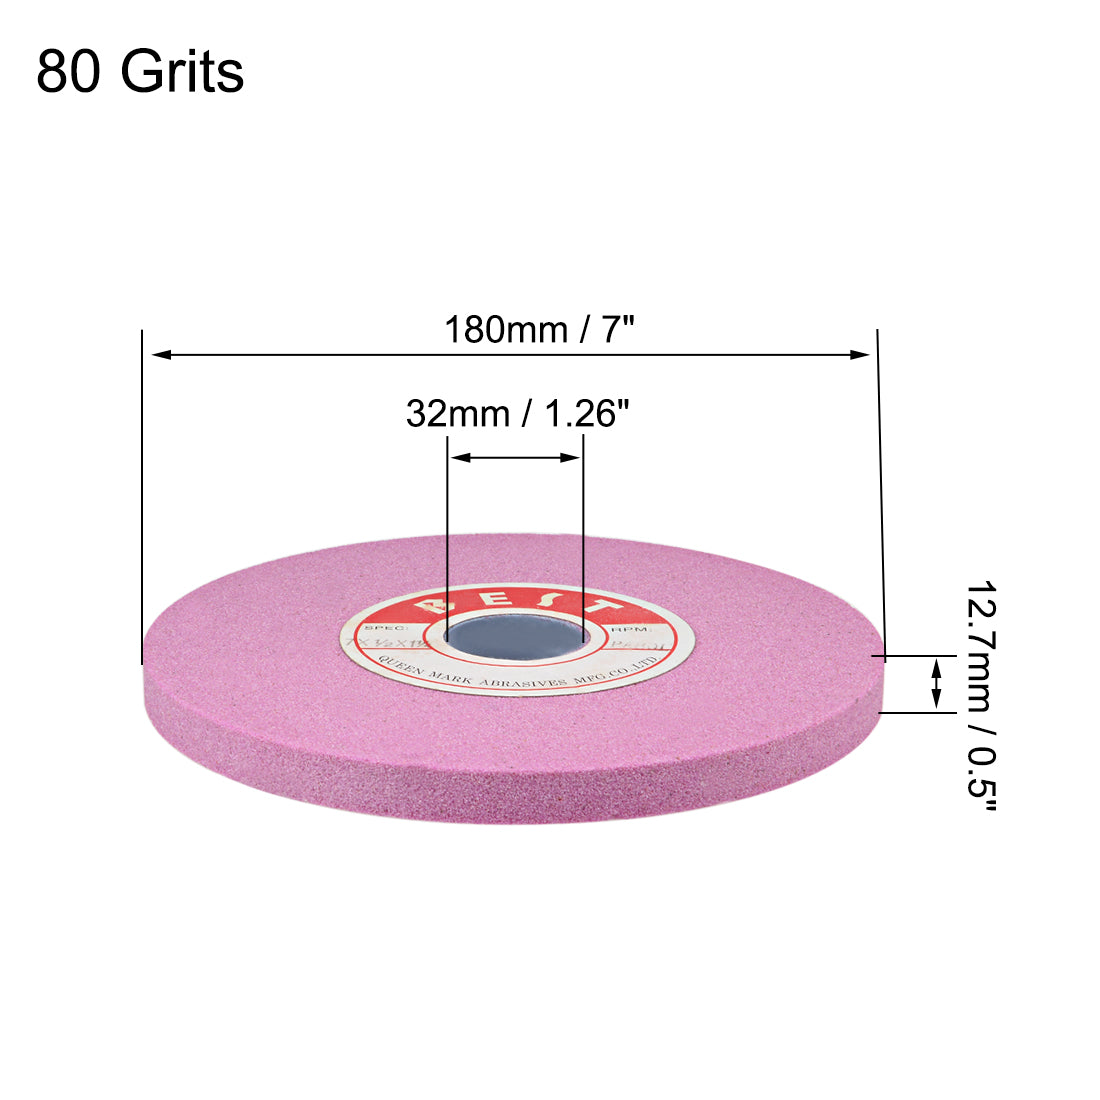 Uxcell Uxcell 7-Inch Bench Grinding Wheels Pink Aluminum Oxide PA 60 Grit for Surface Grinding